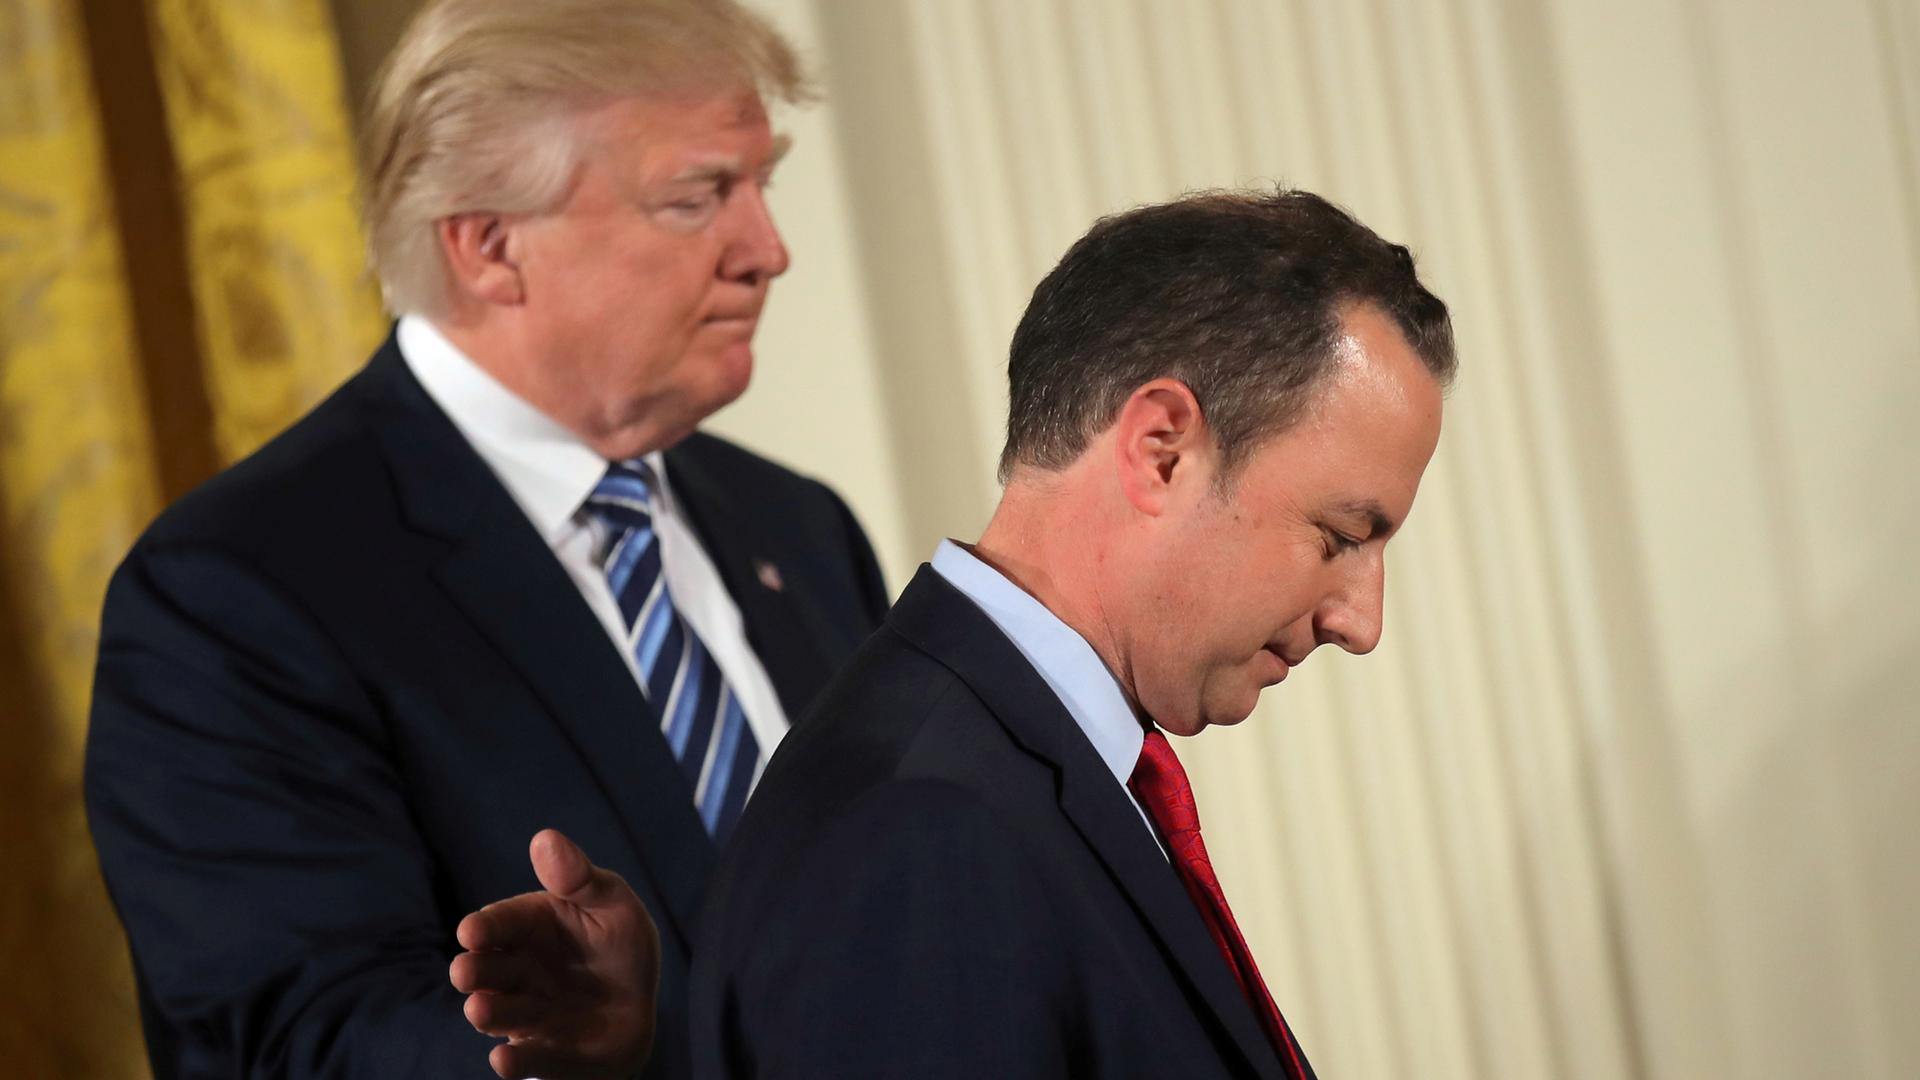 President Donald Trump pats Reince Priebus on the back at the White House in January.